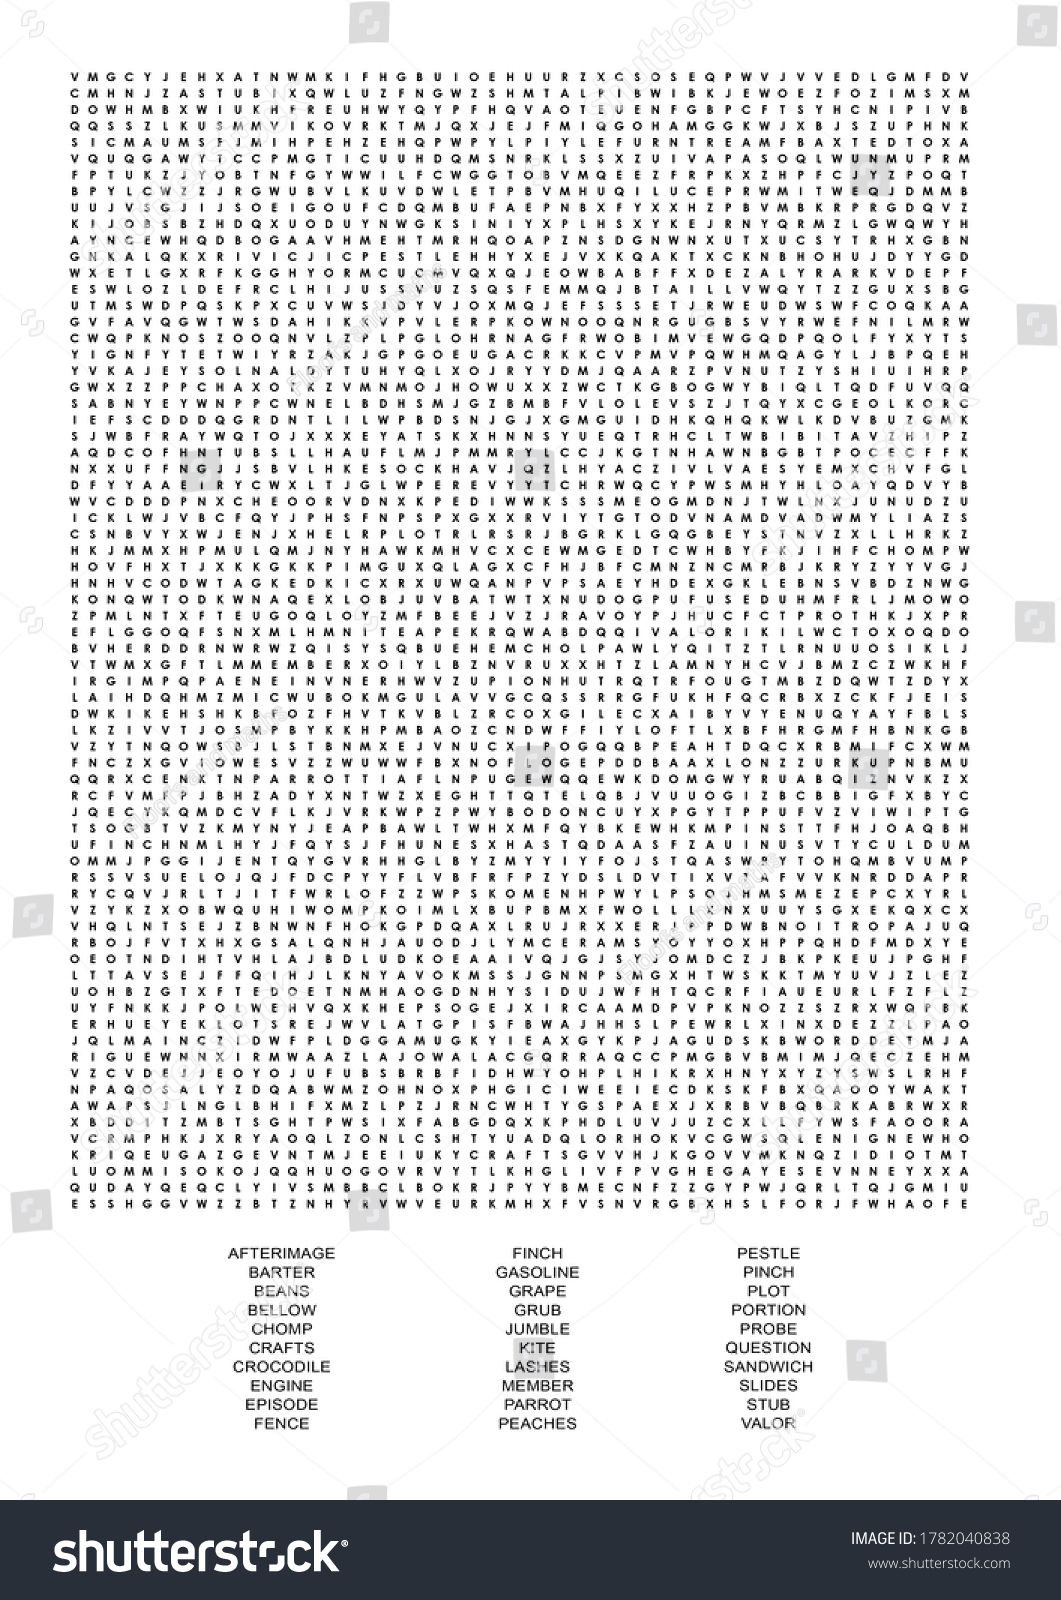 a4sized super difficult word search 39 stock illustration 1692842902 shutterstock